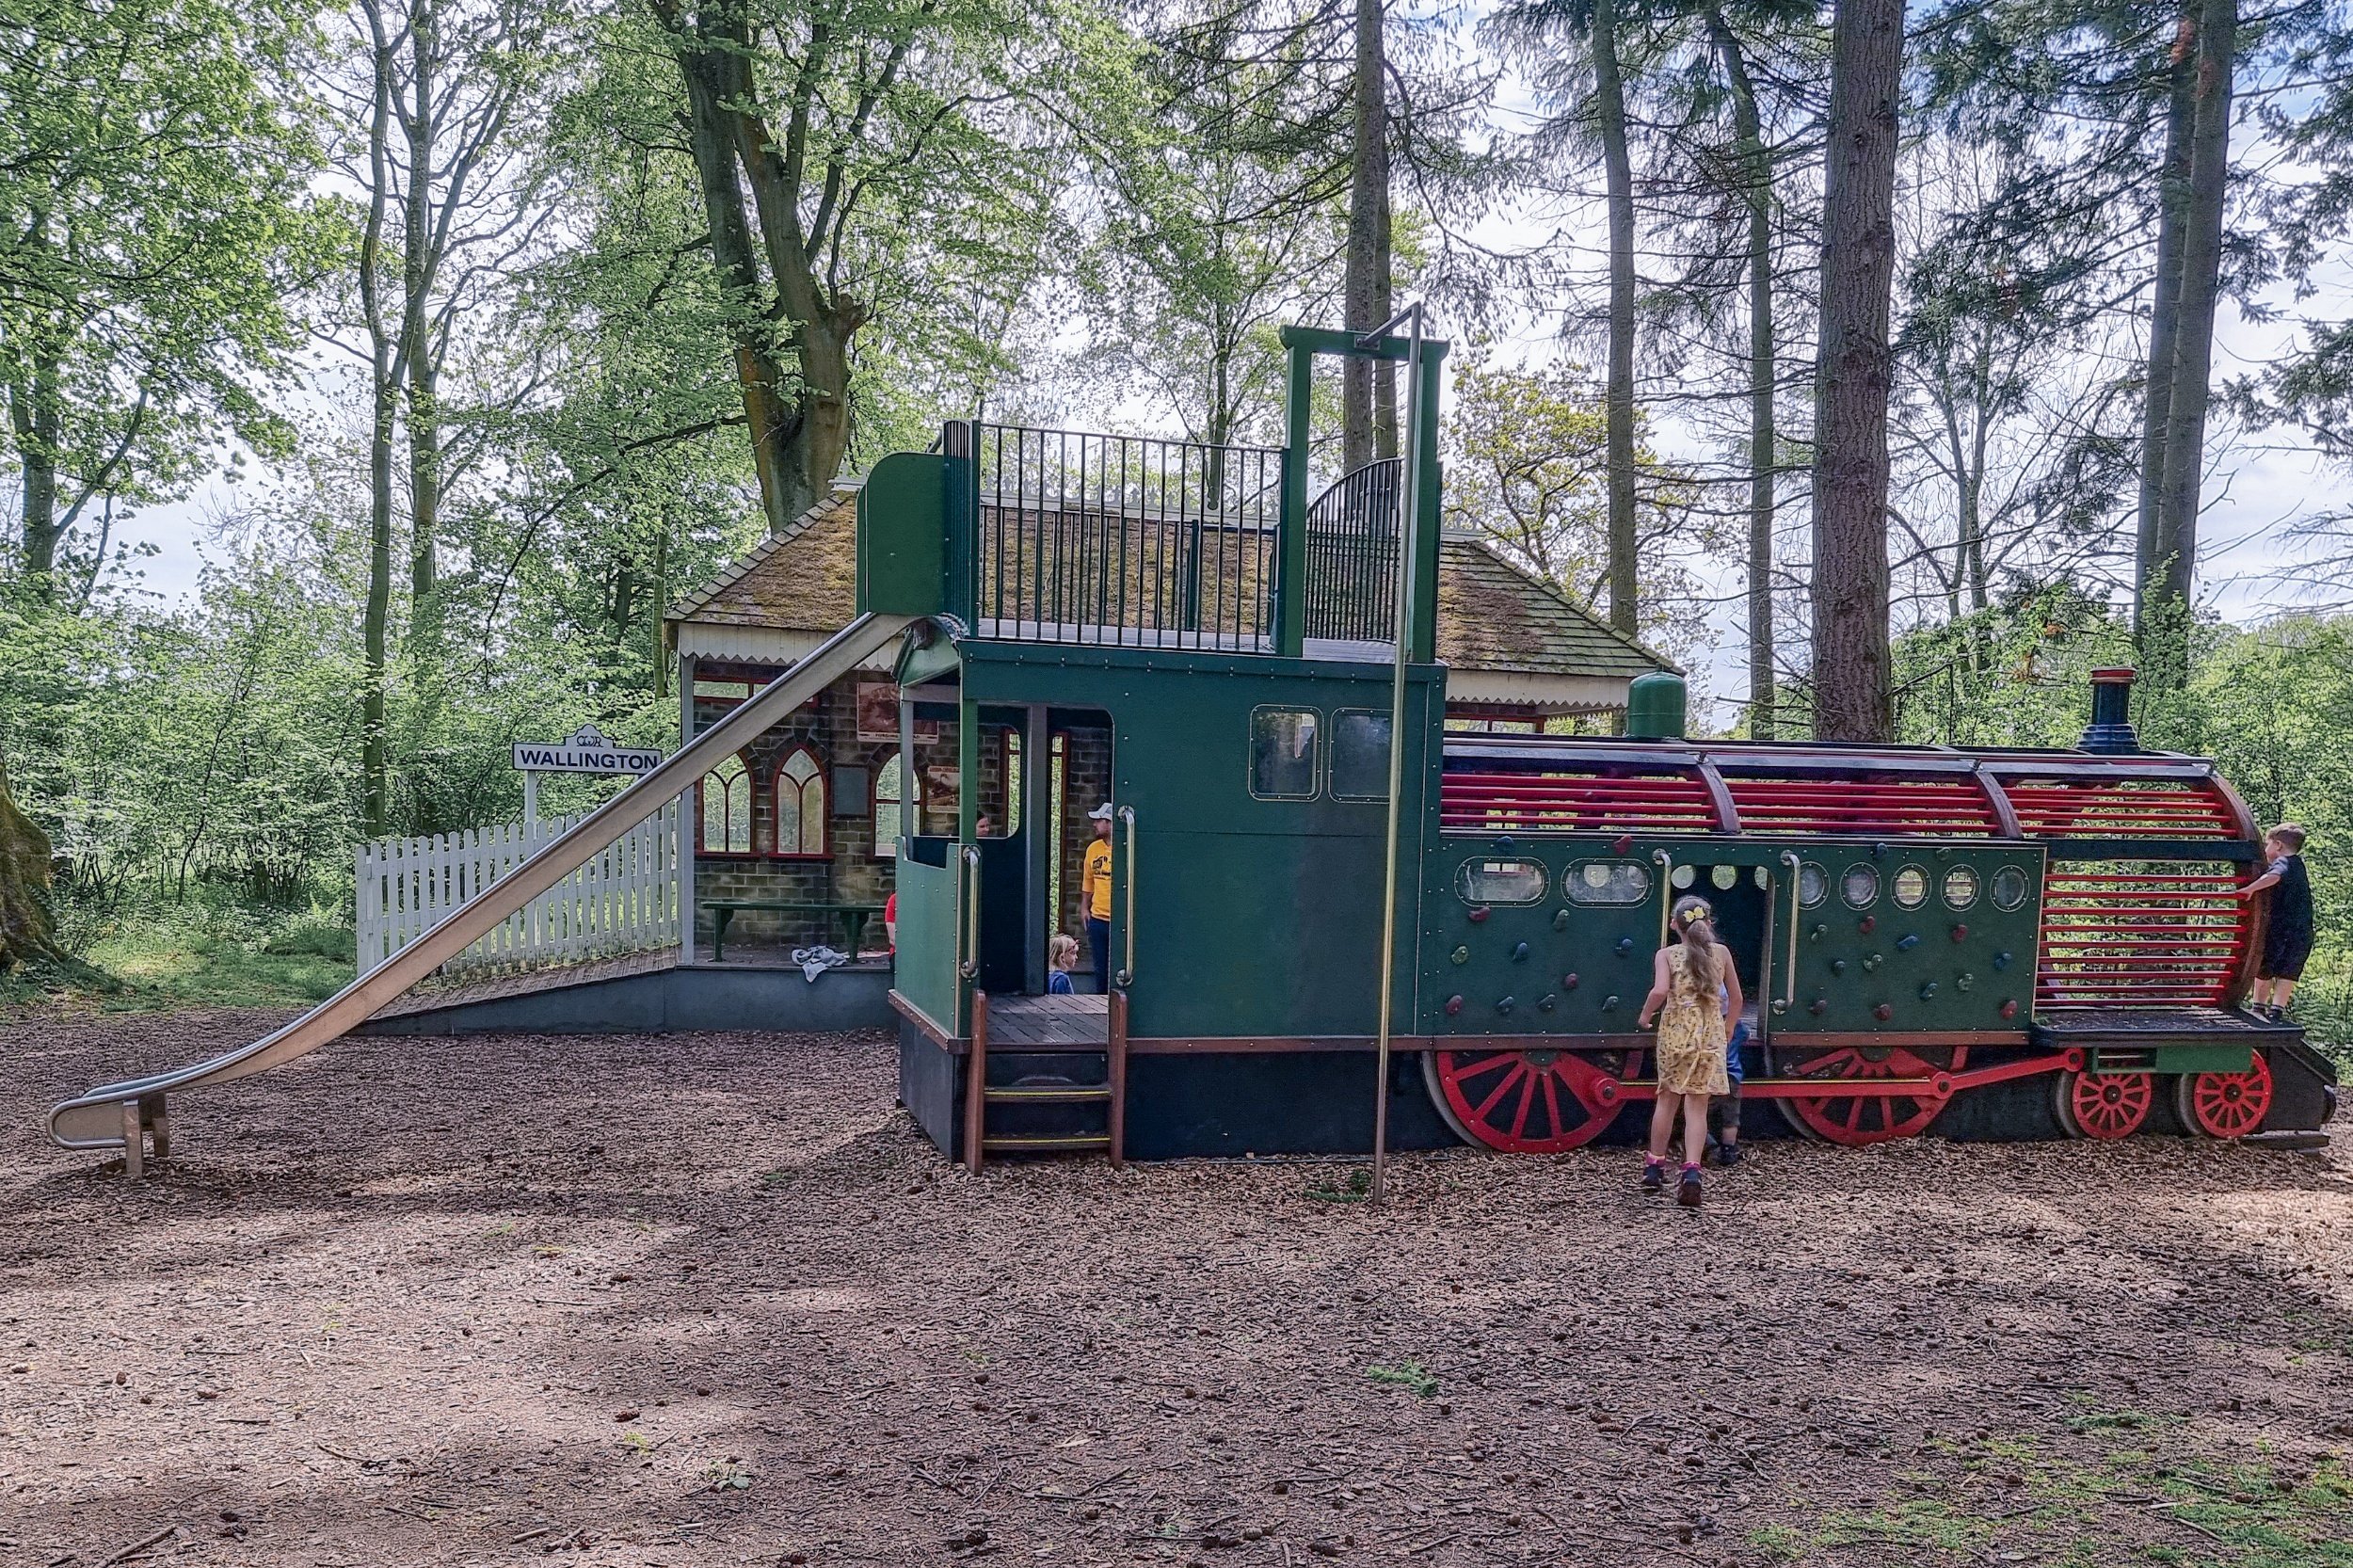 An image of the full view of the play train. It's a metal play frame in the shape of a train with a large slide on the back end.